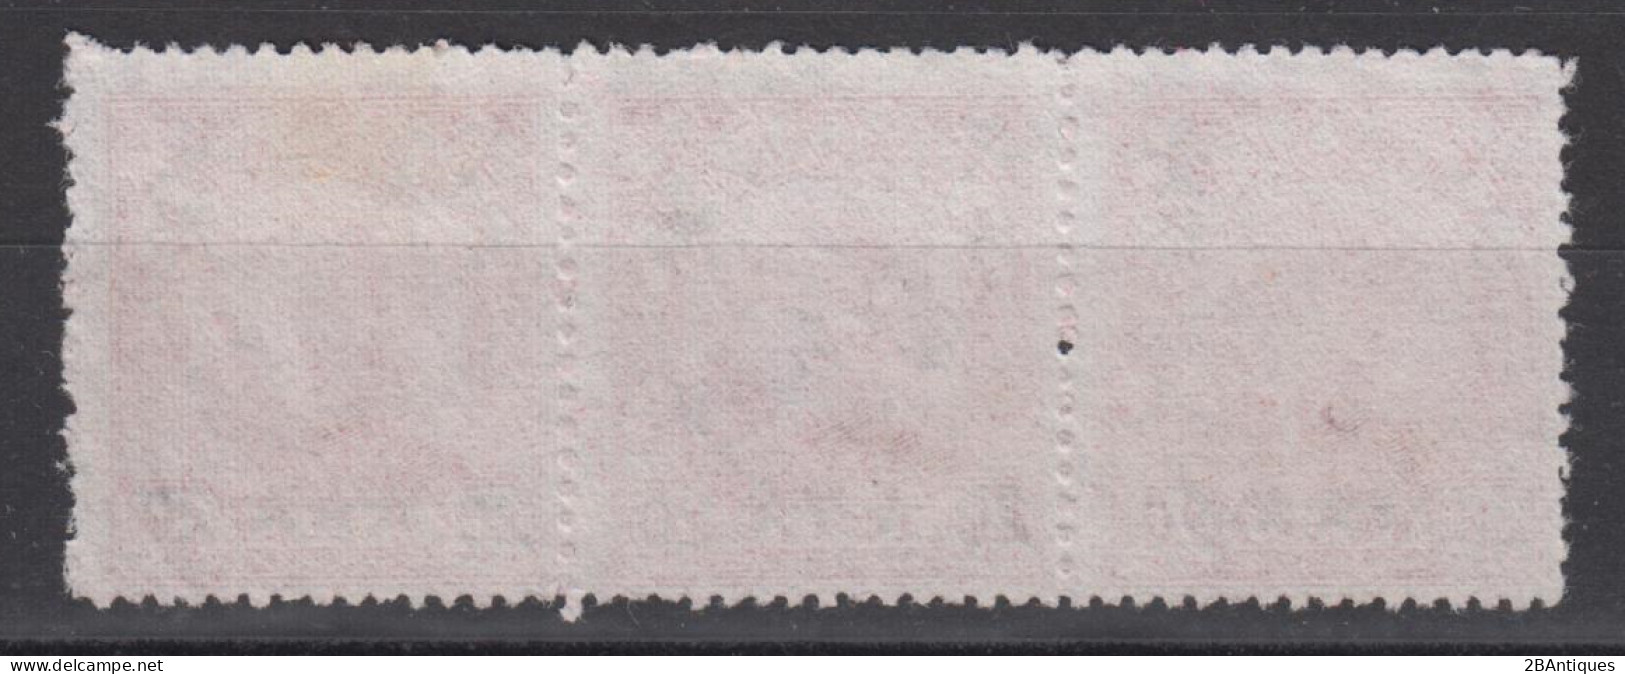 TAIWAN 1949-1950 - North East China Postage Stamps Surcharged STRIP OF 3 - Gebraucht